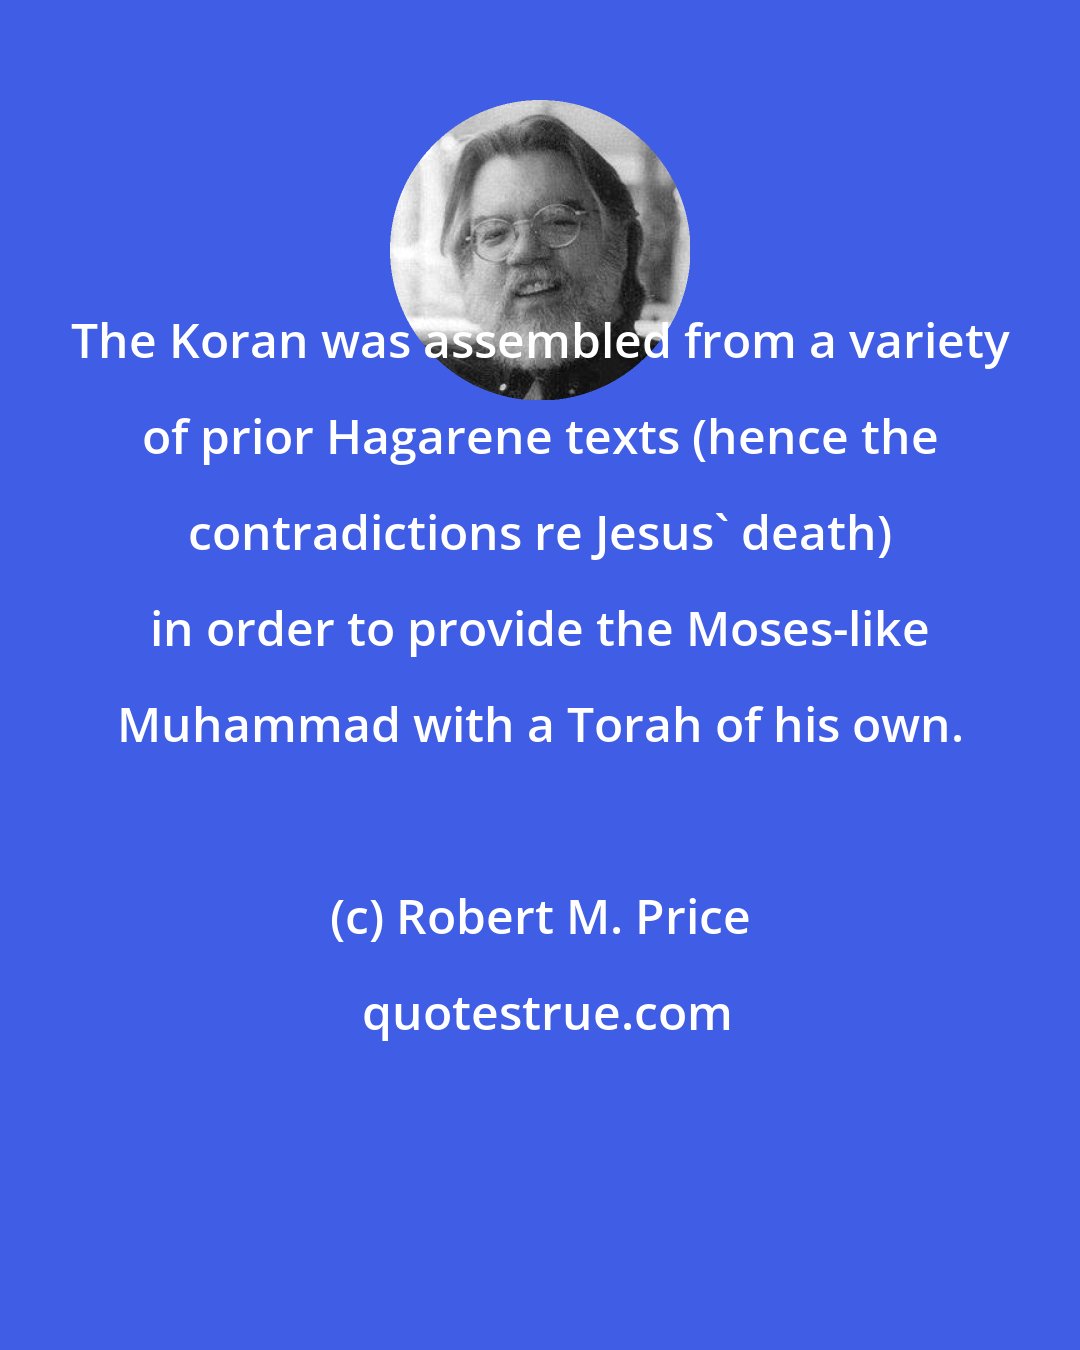 Robert M. Price: The Koran was assembled from a variety of prior Hagarene texts (hence the contradictions re Jesus' death) in order to provide the Moses-like Muhammad with a Torah of his own.